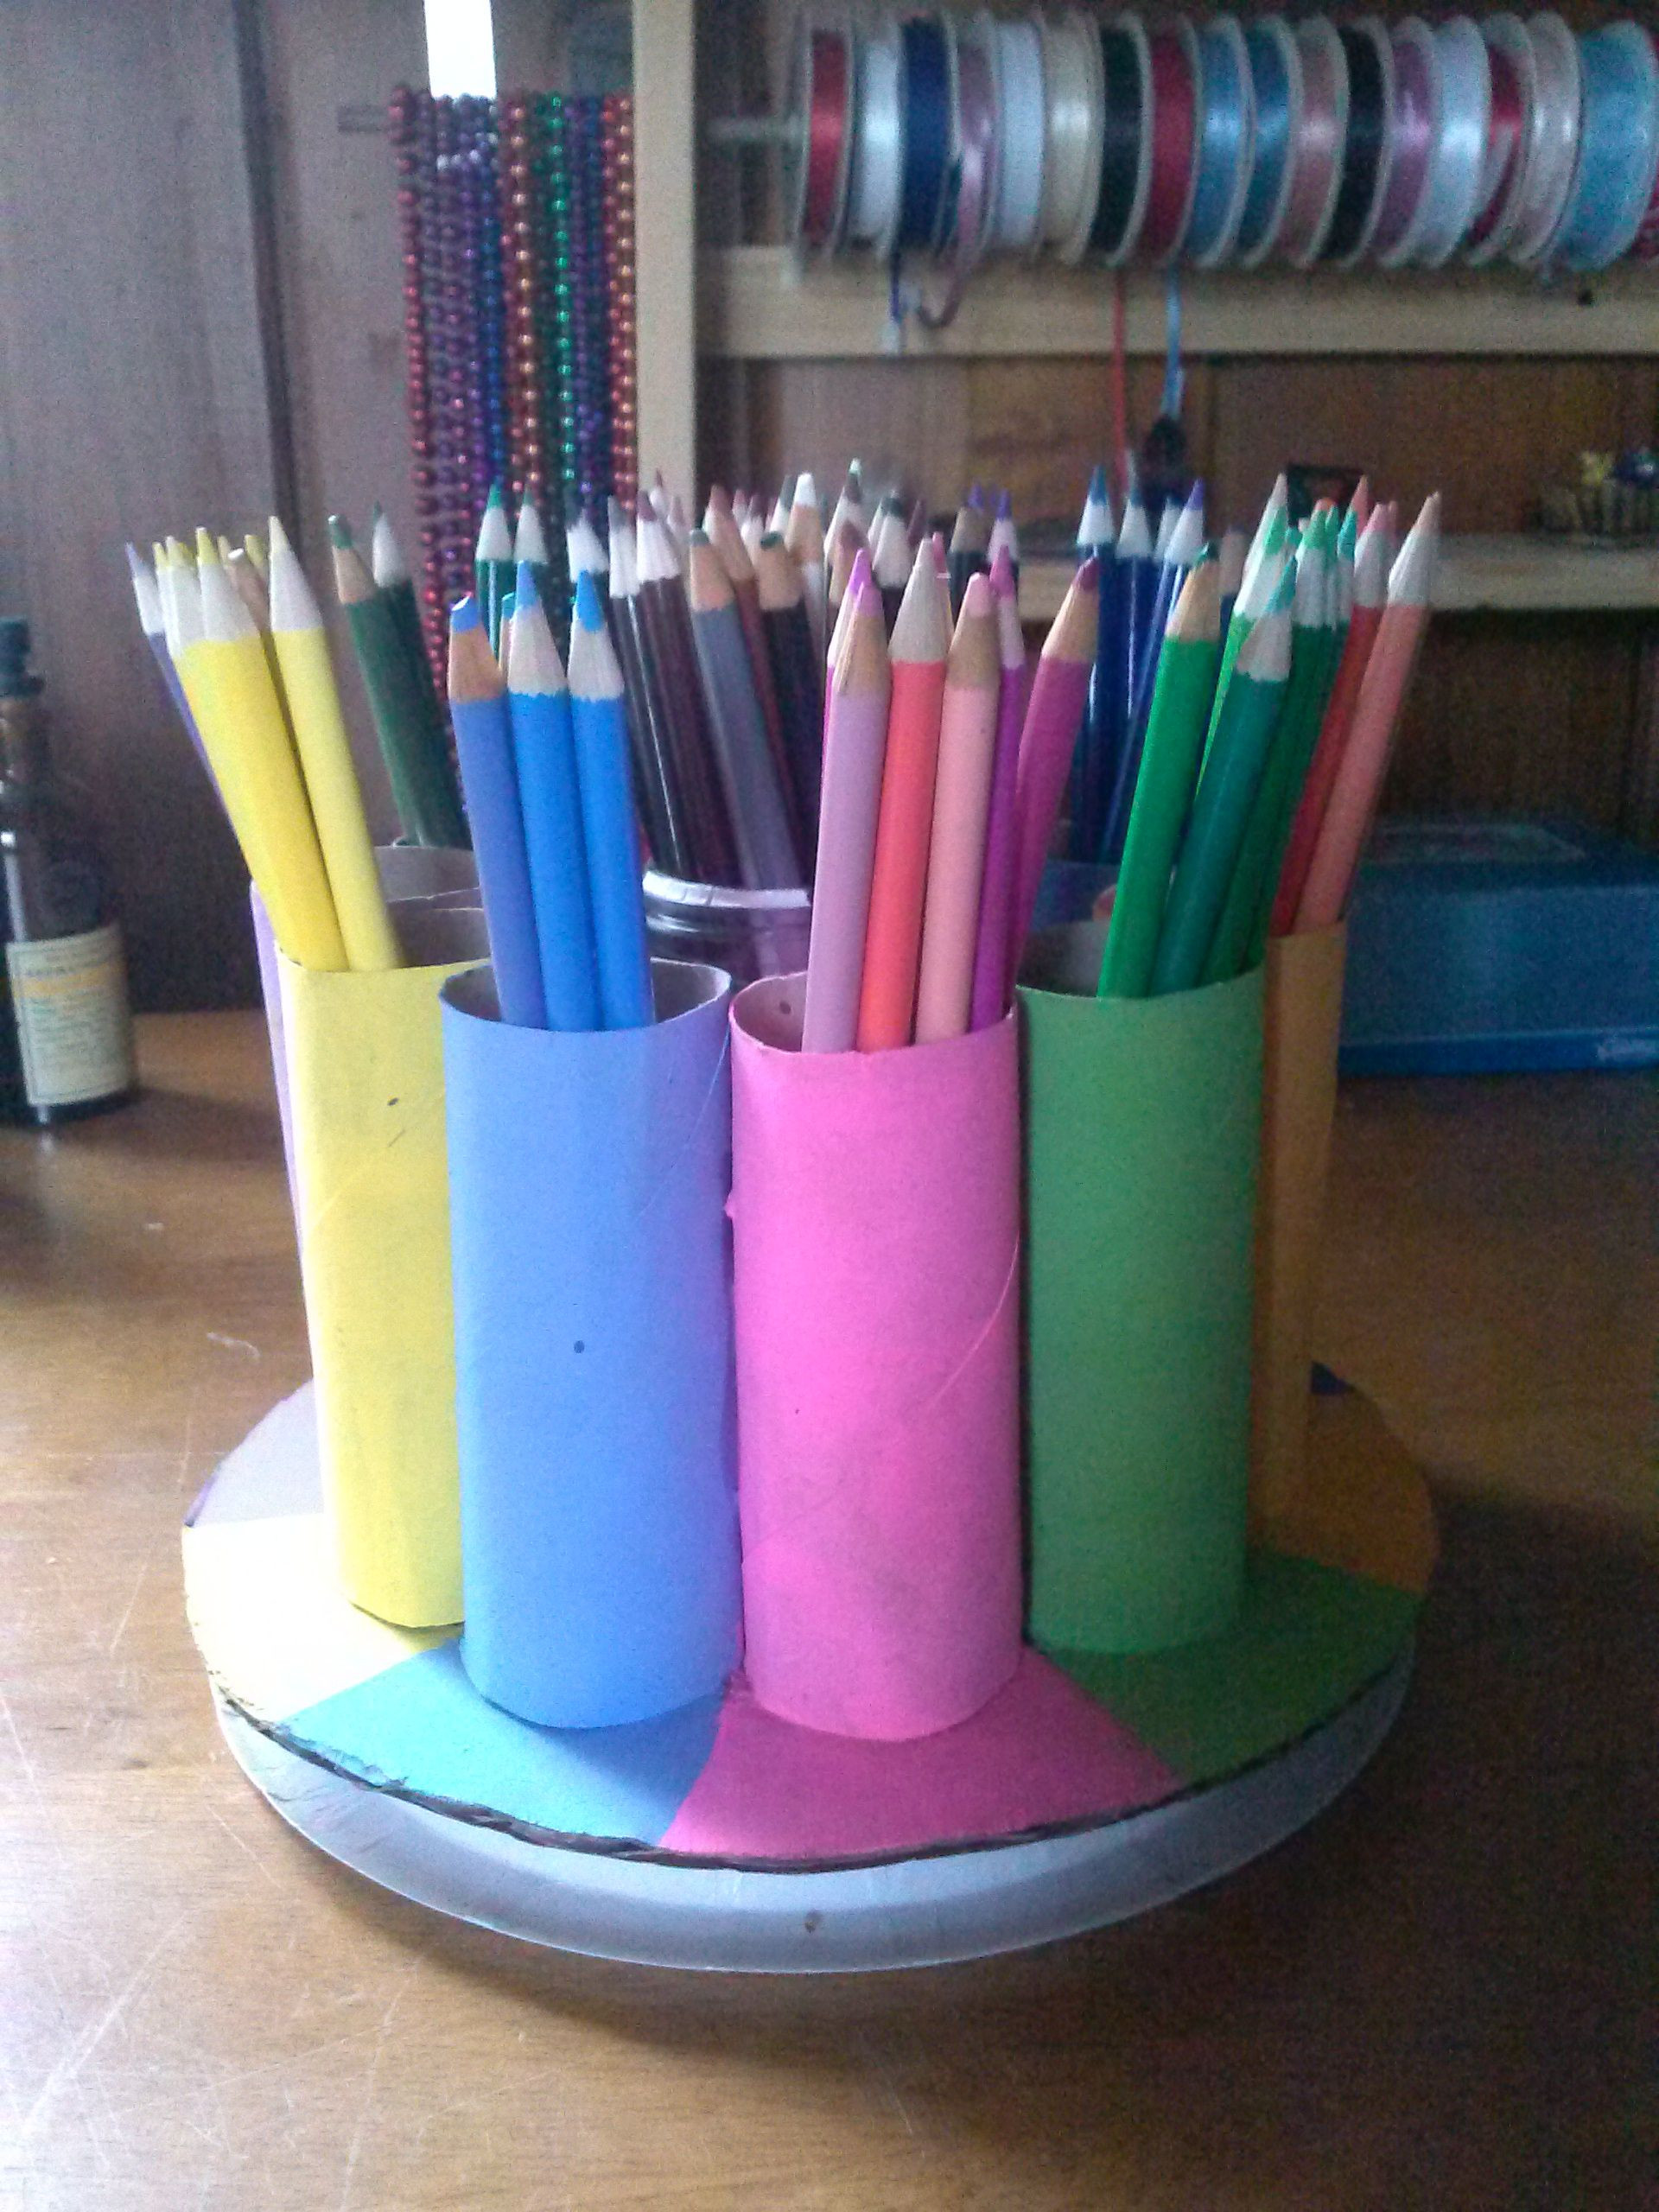 DIY Colored Pencil Organizer
 Painted toilet paper rolls glued to a piece of cardboard